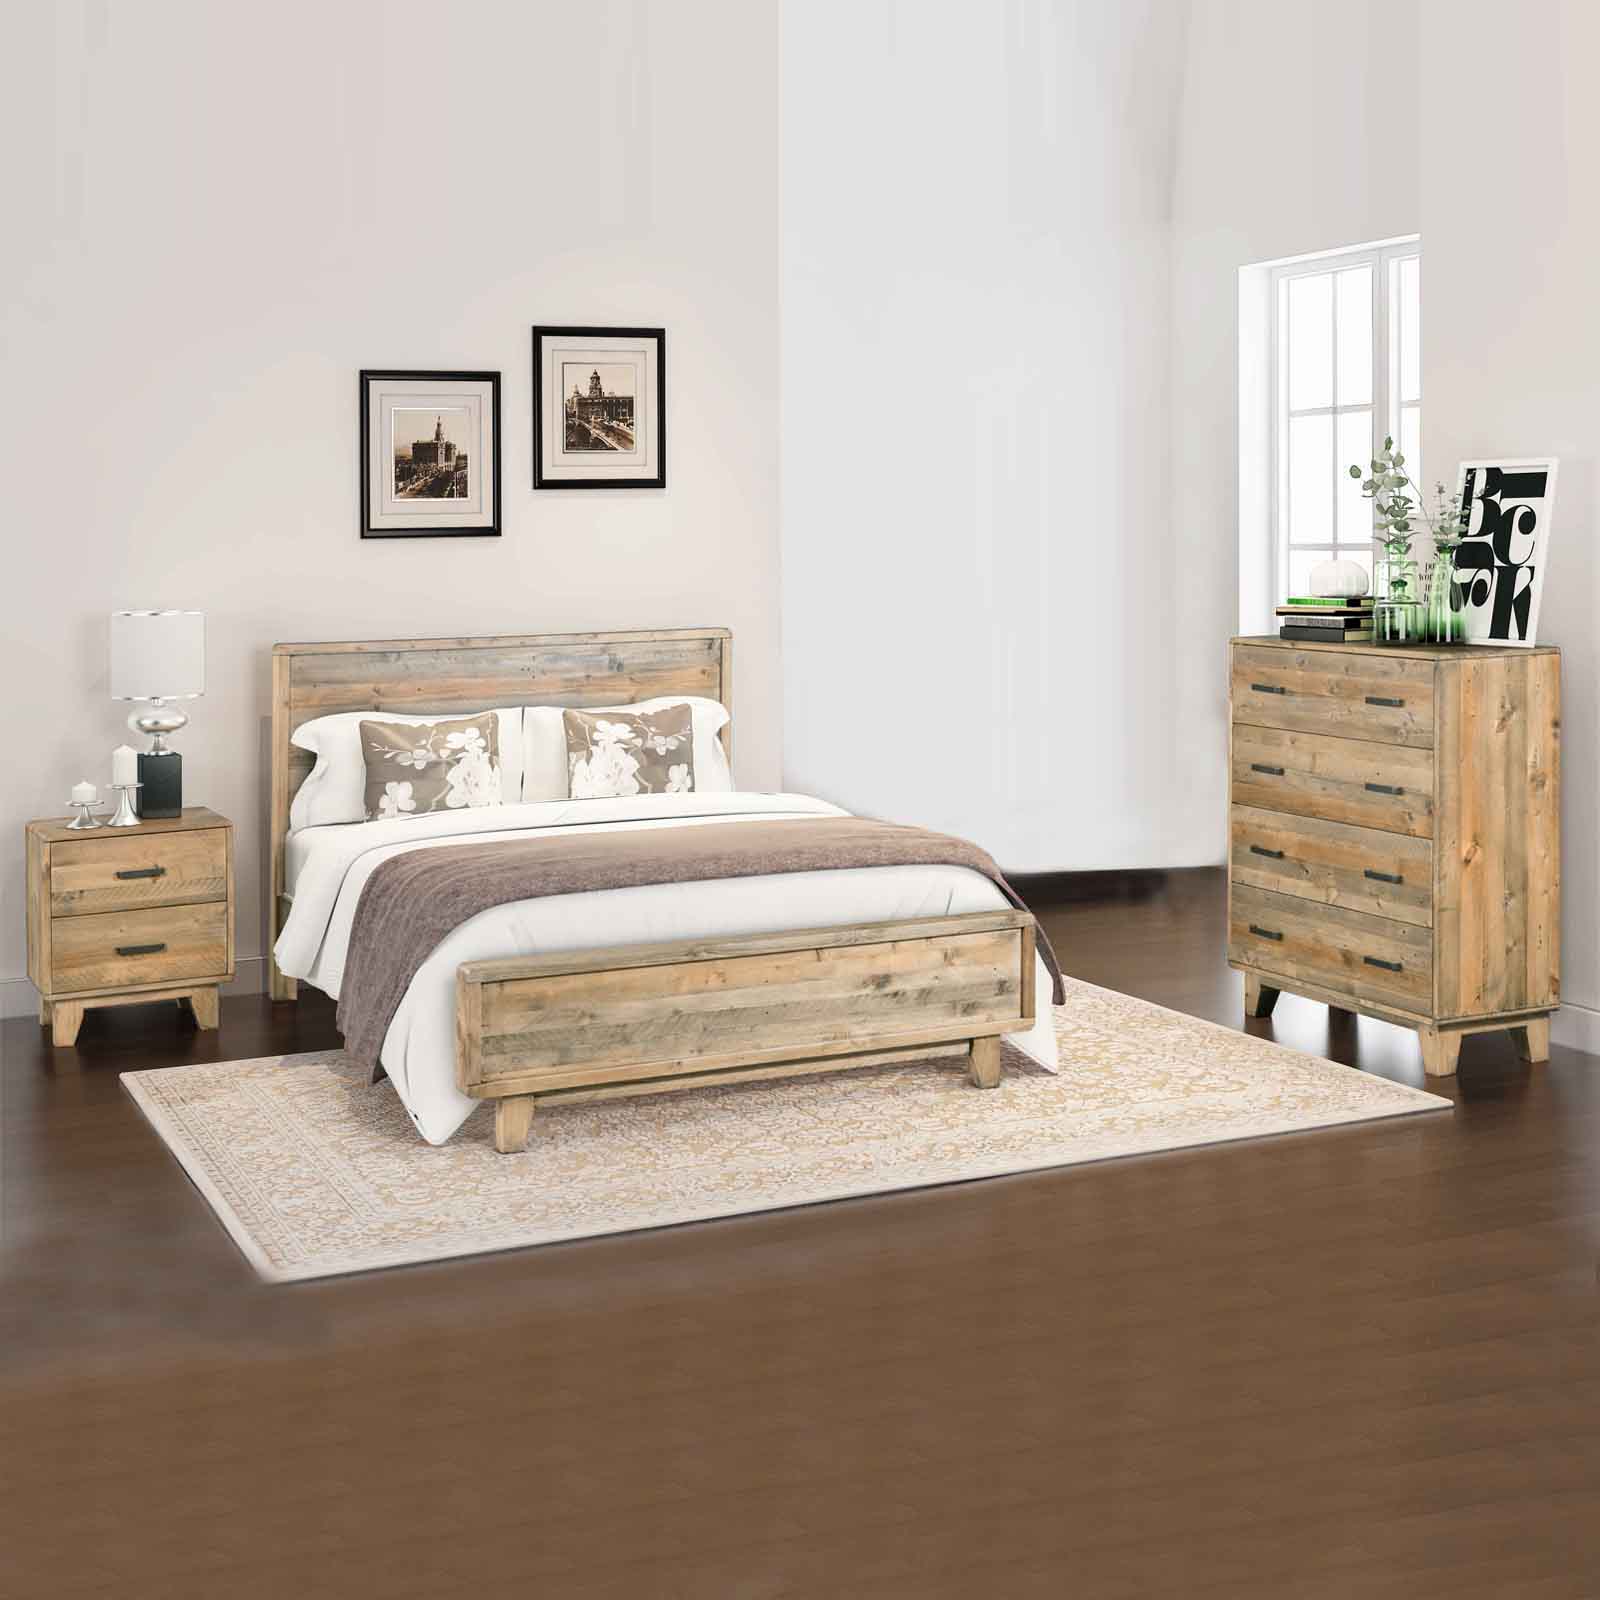 4 Pieces Bedroom Suite Double Size in Solid Wood Antique Design Light Brown Bed, Bedside Table & Tallboy - SILBERSHELL